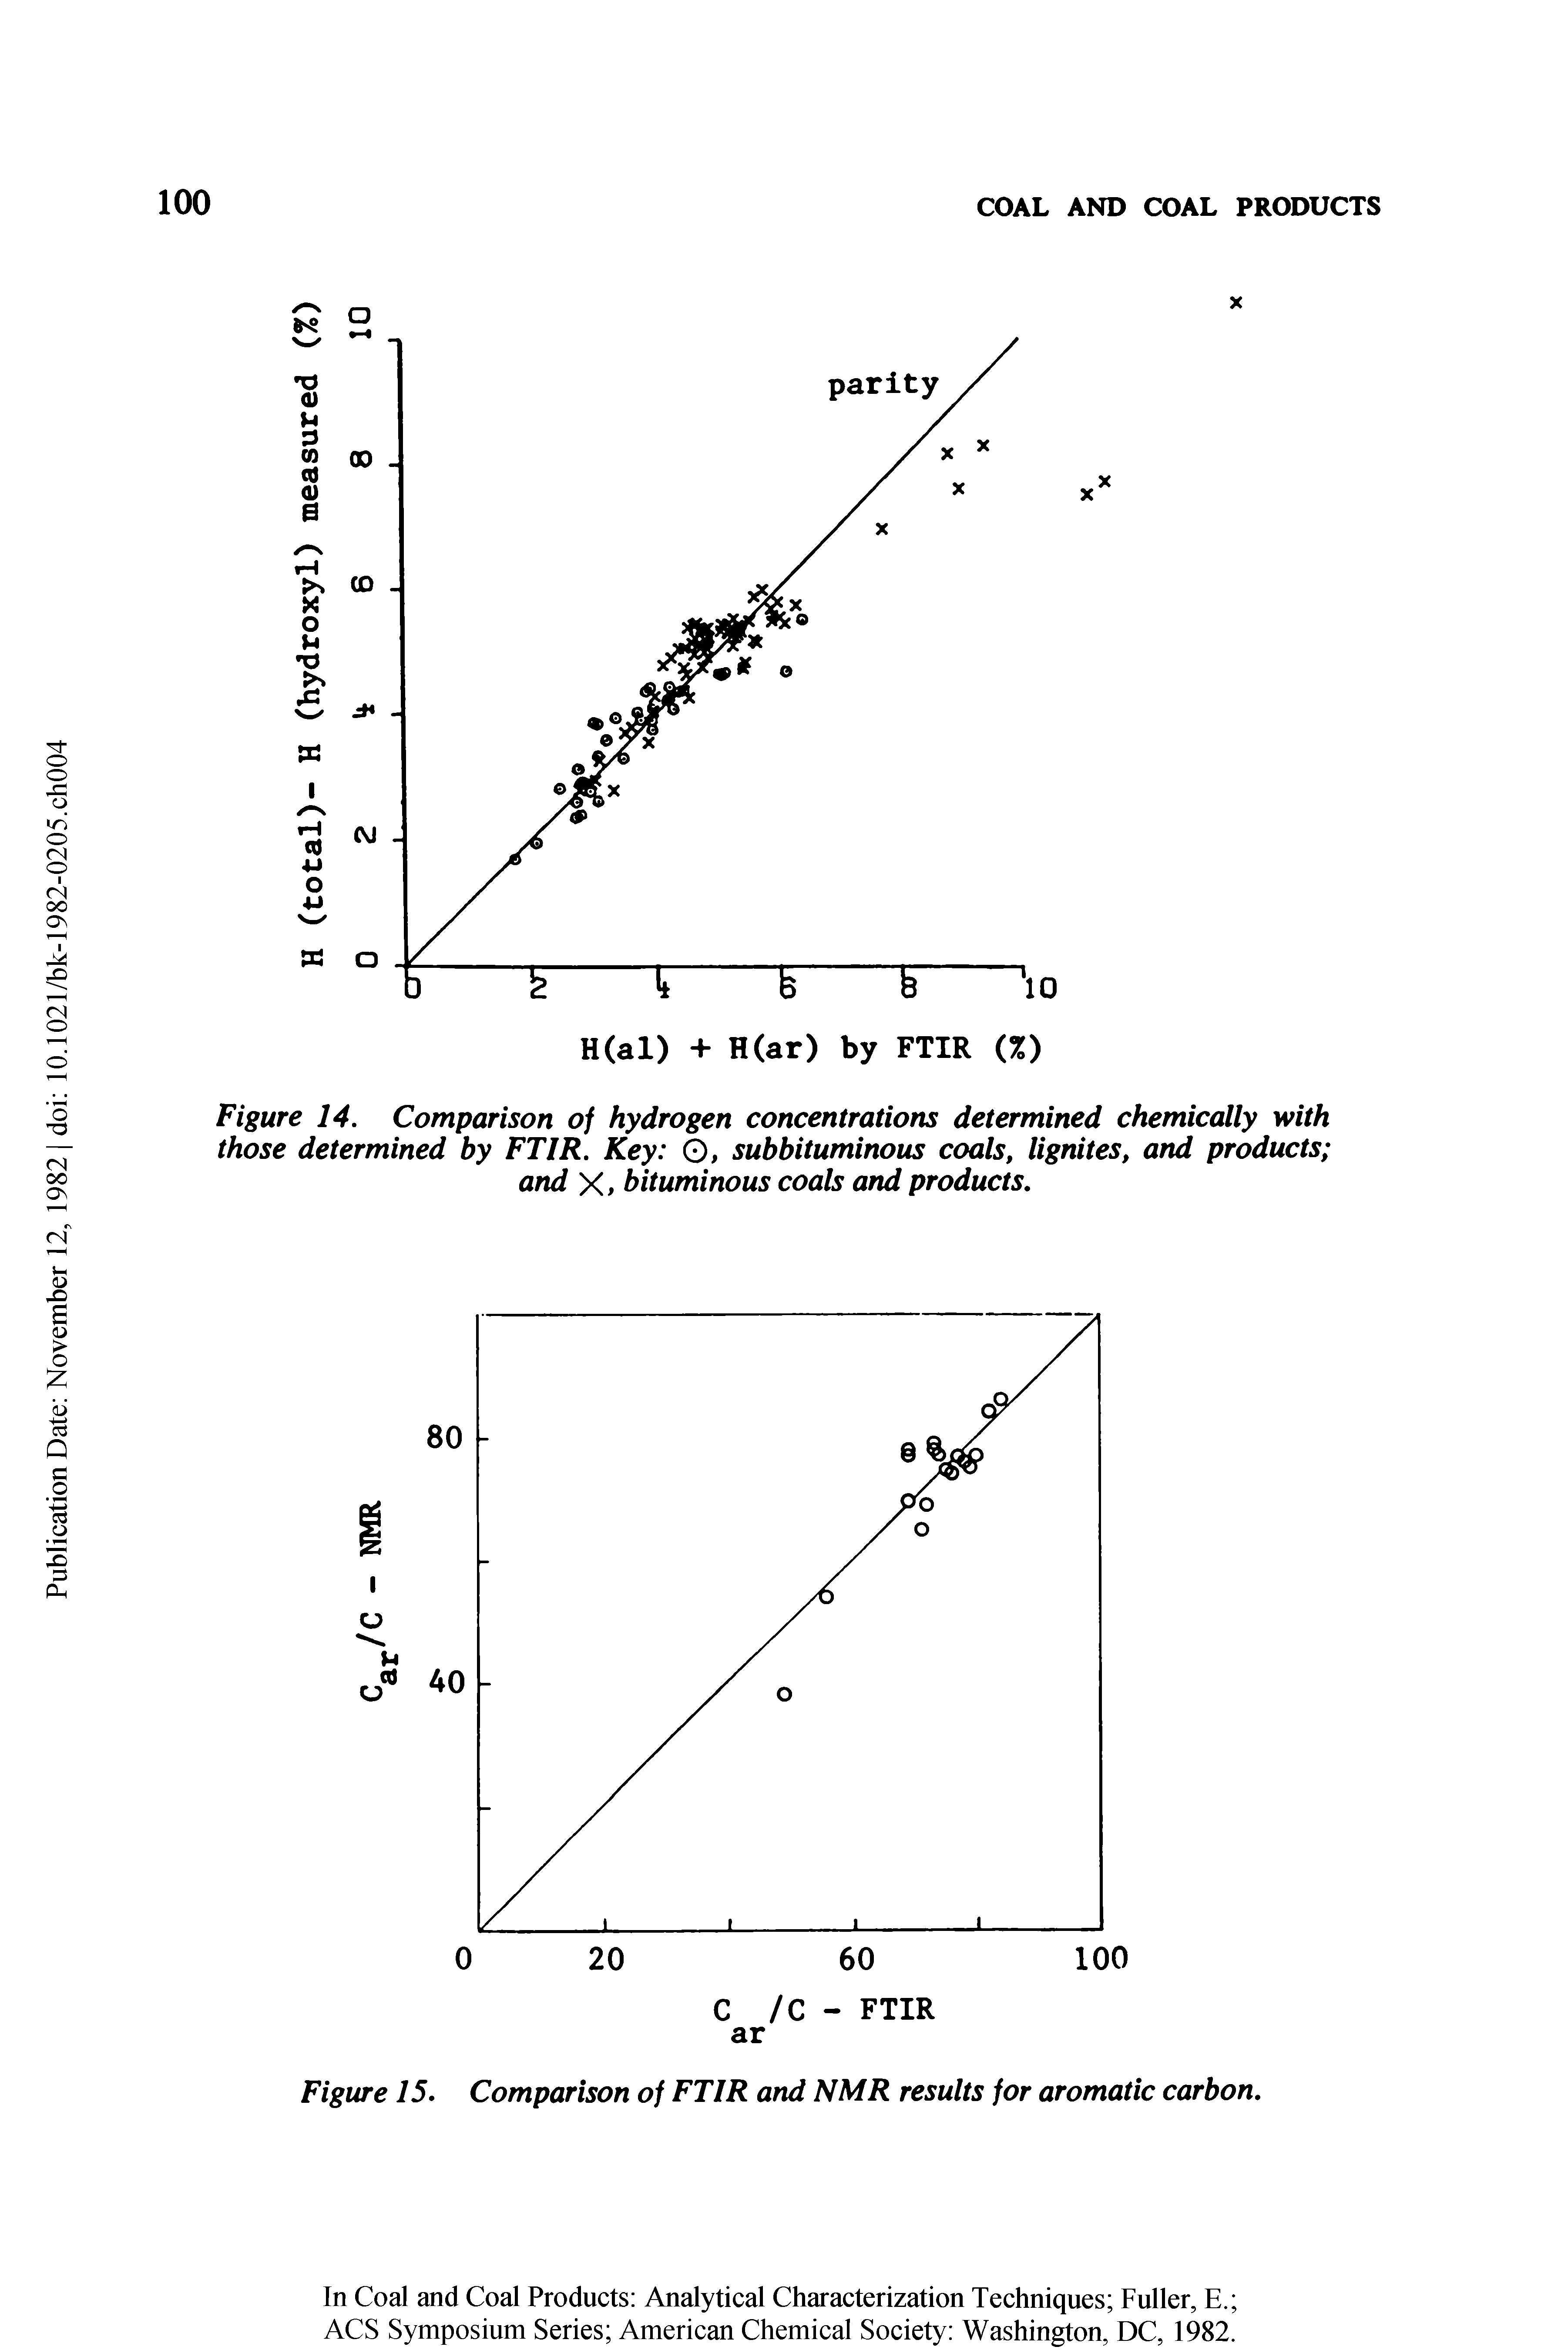 Figure 14. Comparison of hydrogen concentrations determined chemically with those determined by FTIR. Key 0 subbituminous coals, lignites, and products and X> bituminous coals and products.